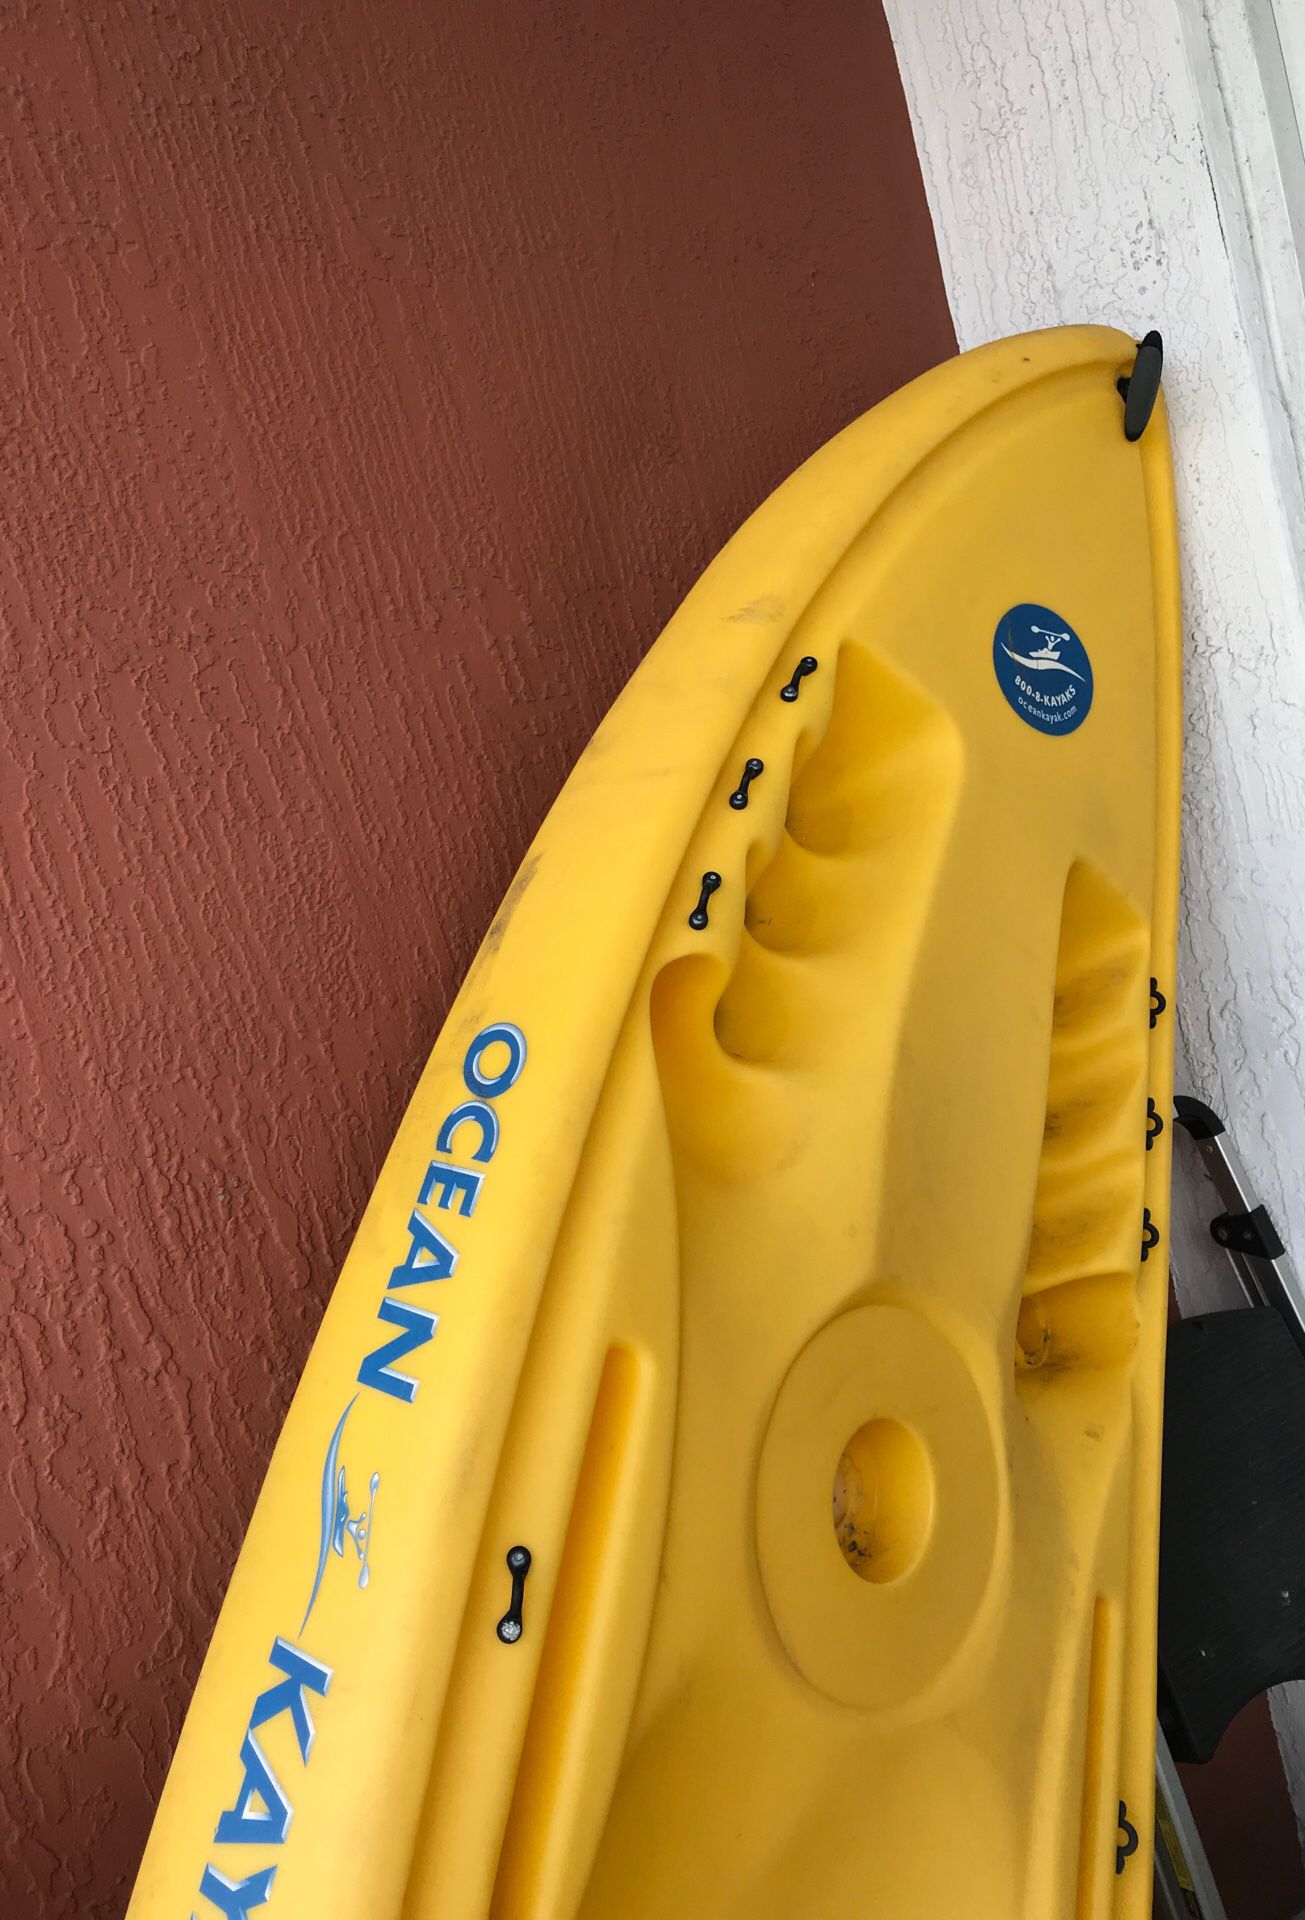 Ocean kayak with paddles for sale ! $120